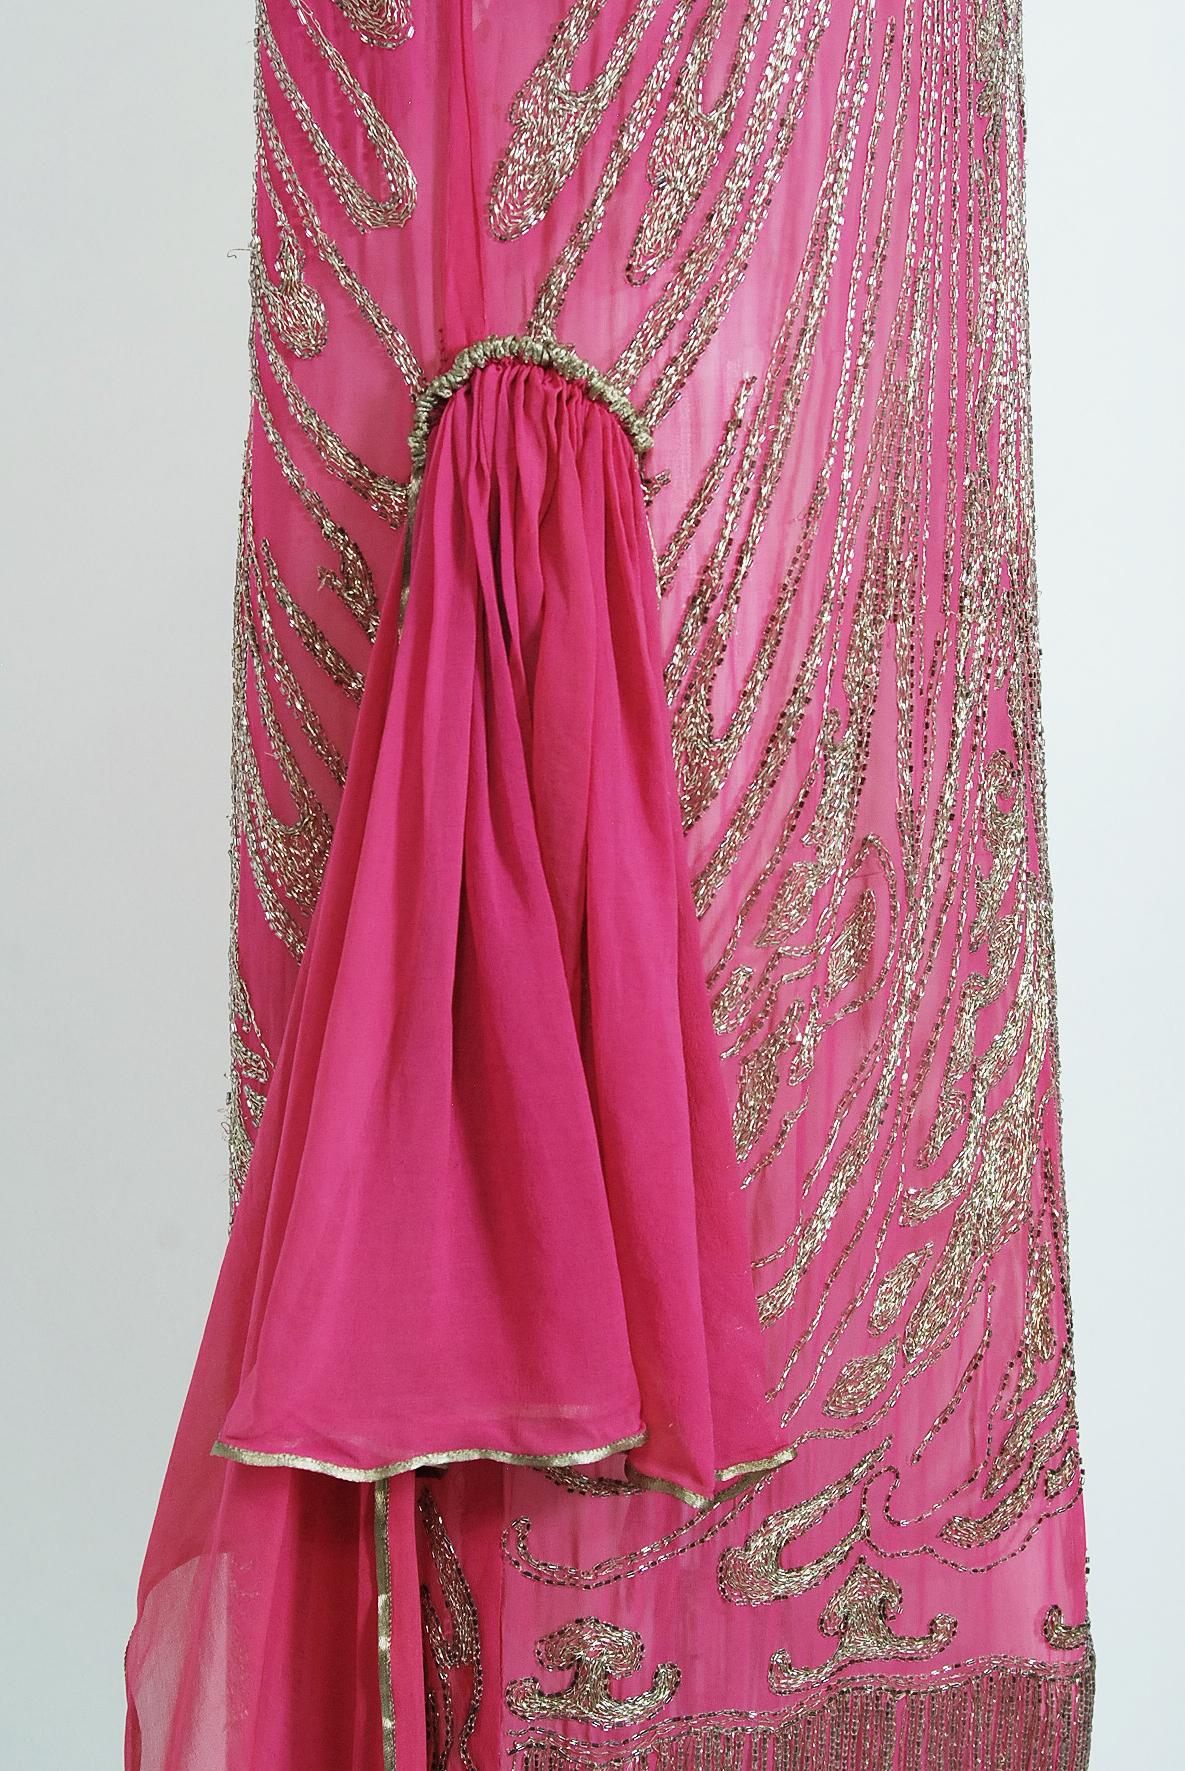 Women's Vintage 1920's French Couture Fuchsia Pink Beaded Embroidered Silk Flapper Dress